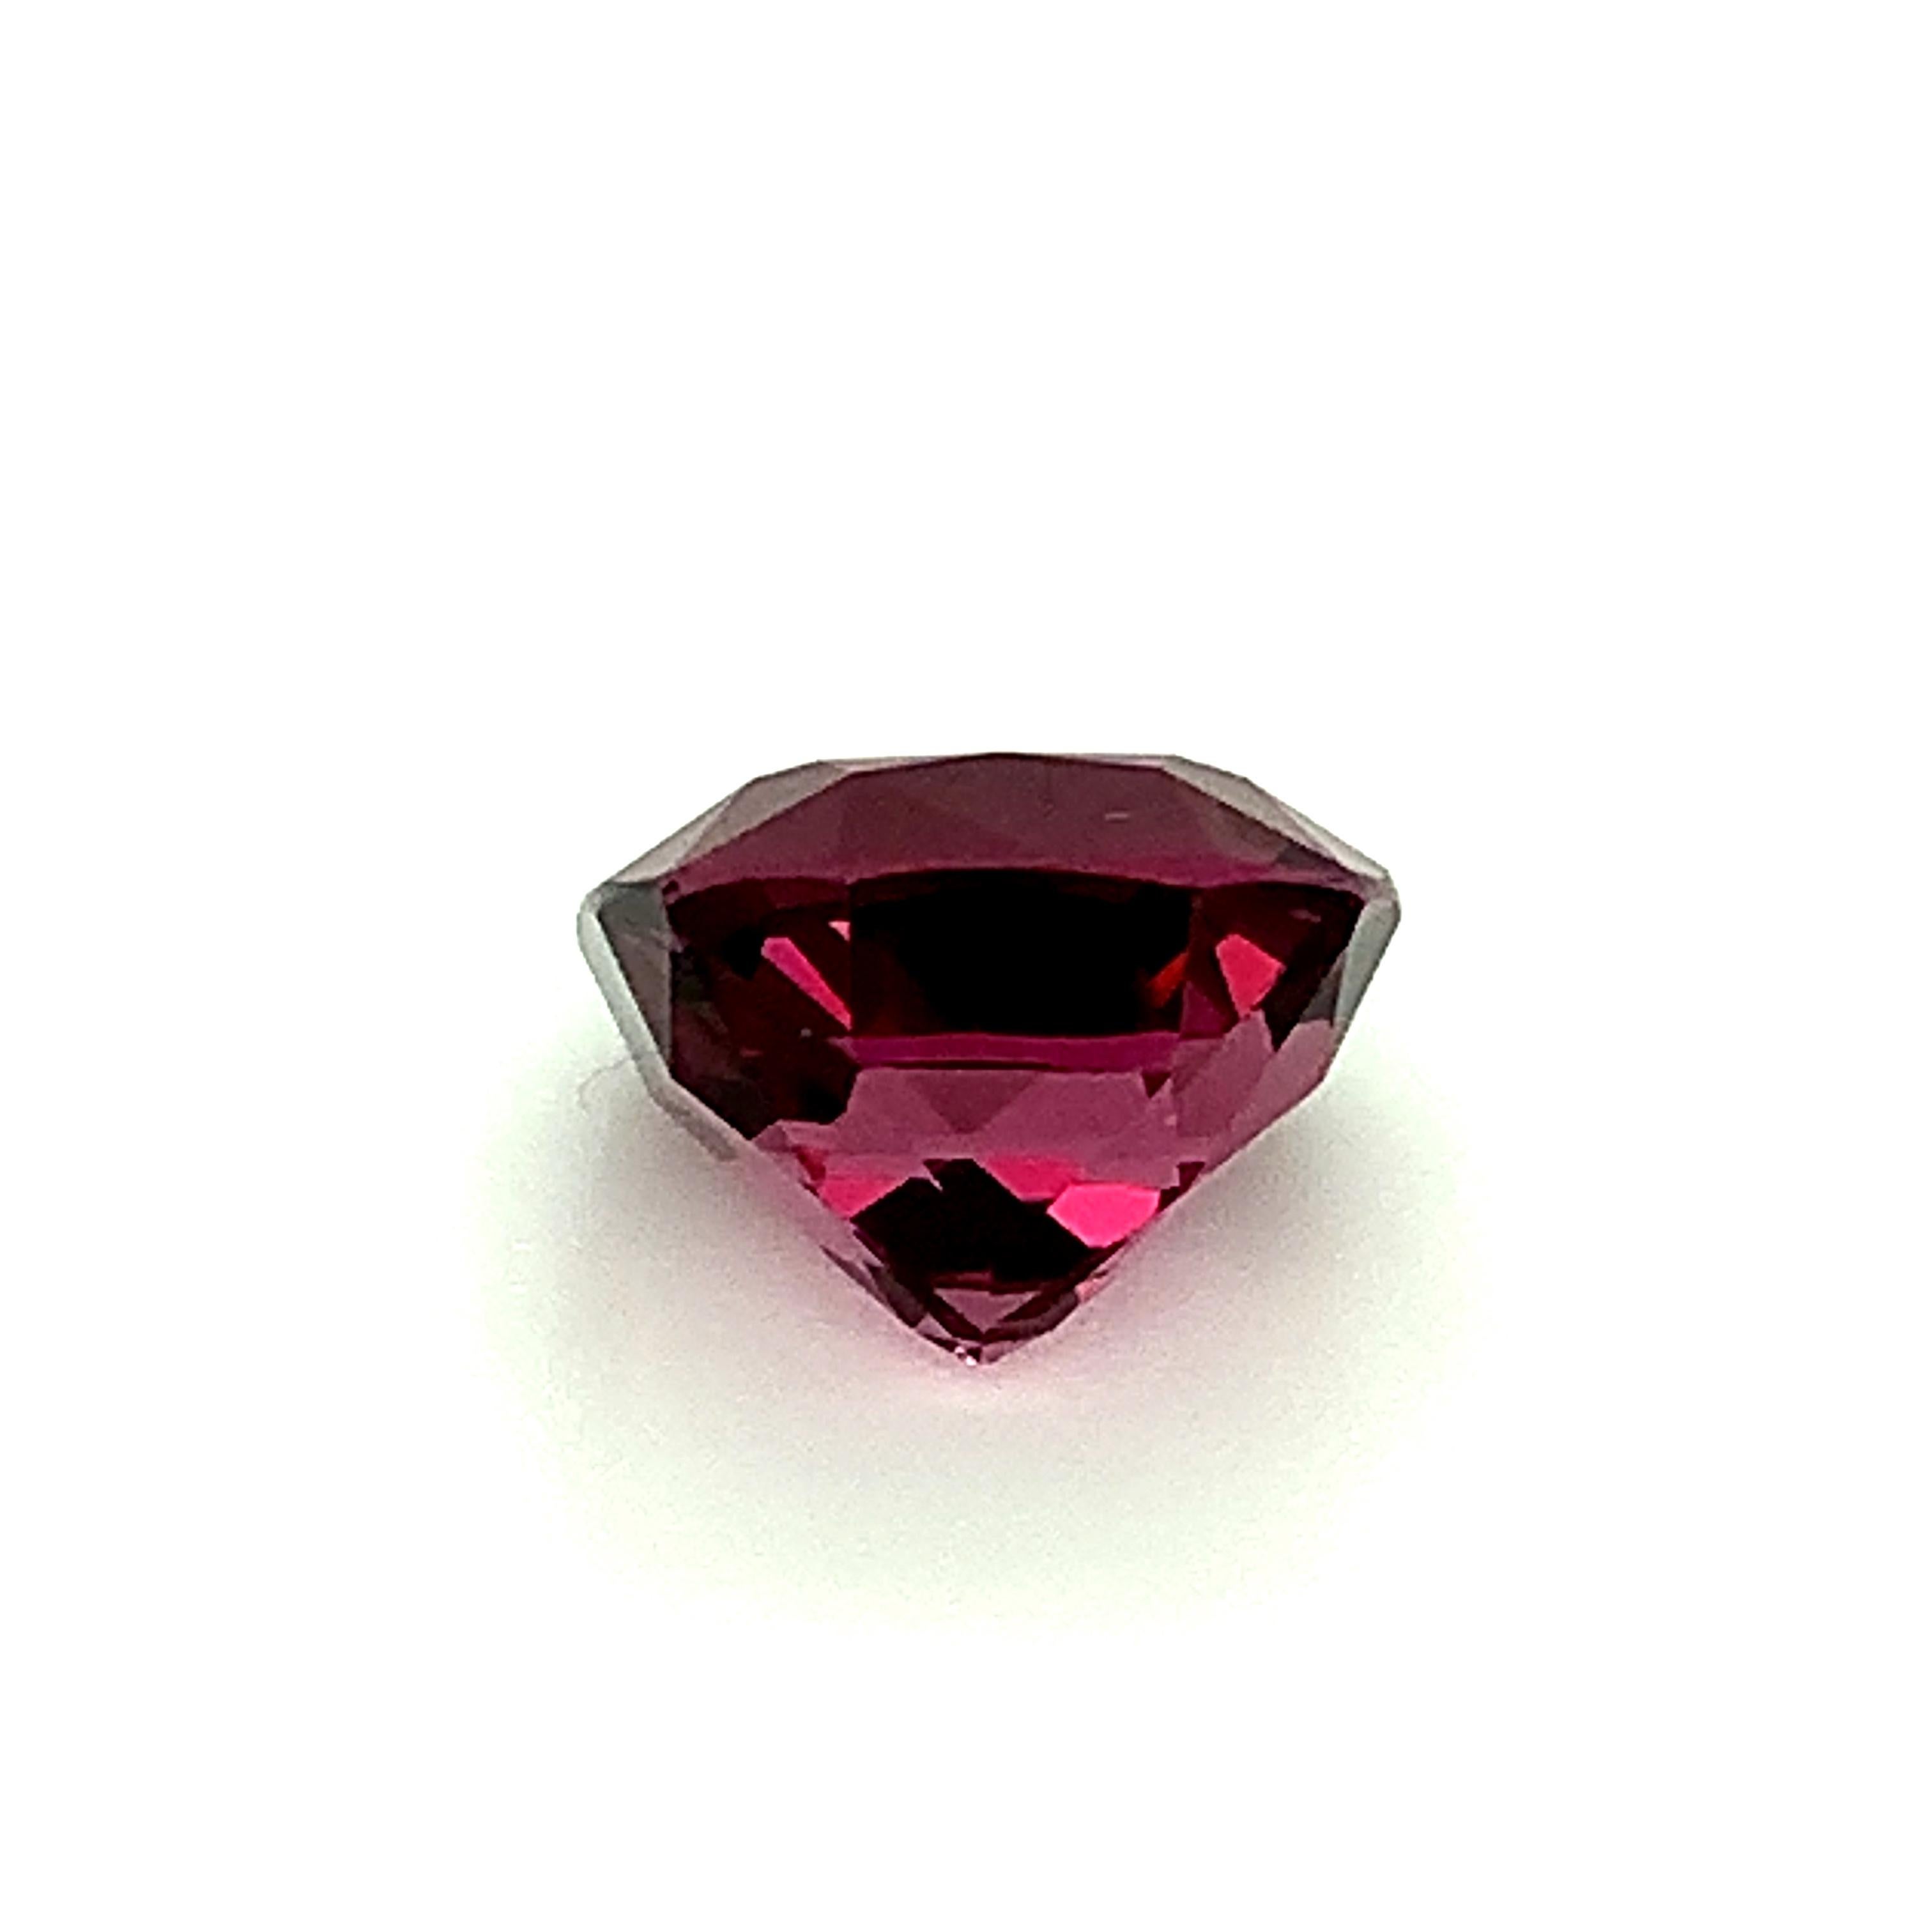 Women's or Men's Unheated 9.26 Carat Purple Pink Spinel Cushion, Loose Gemstone, GIA Certified .A For Sale